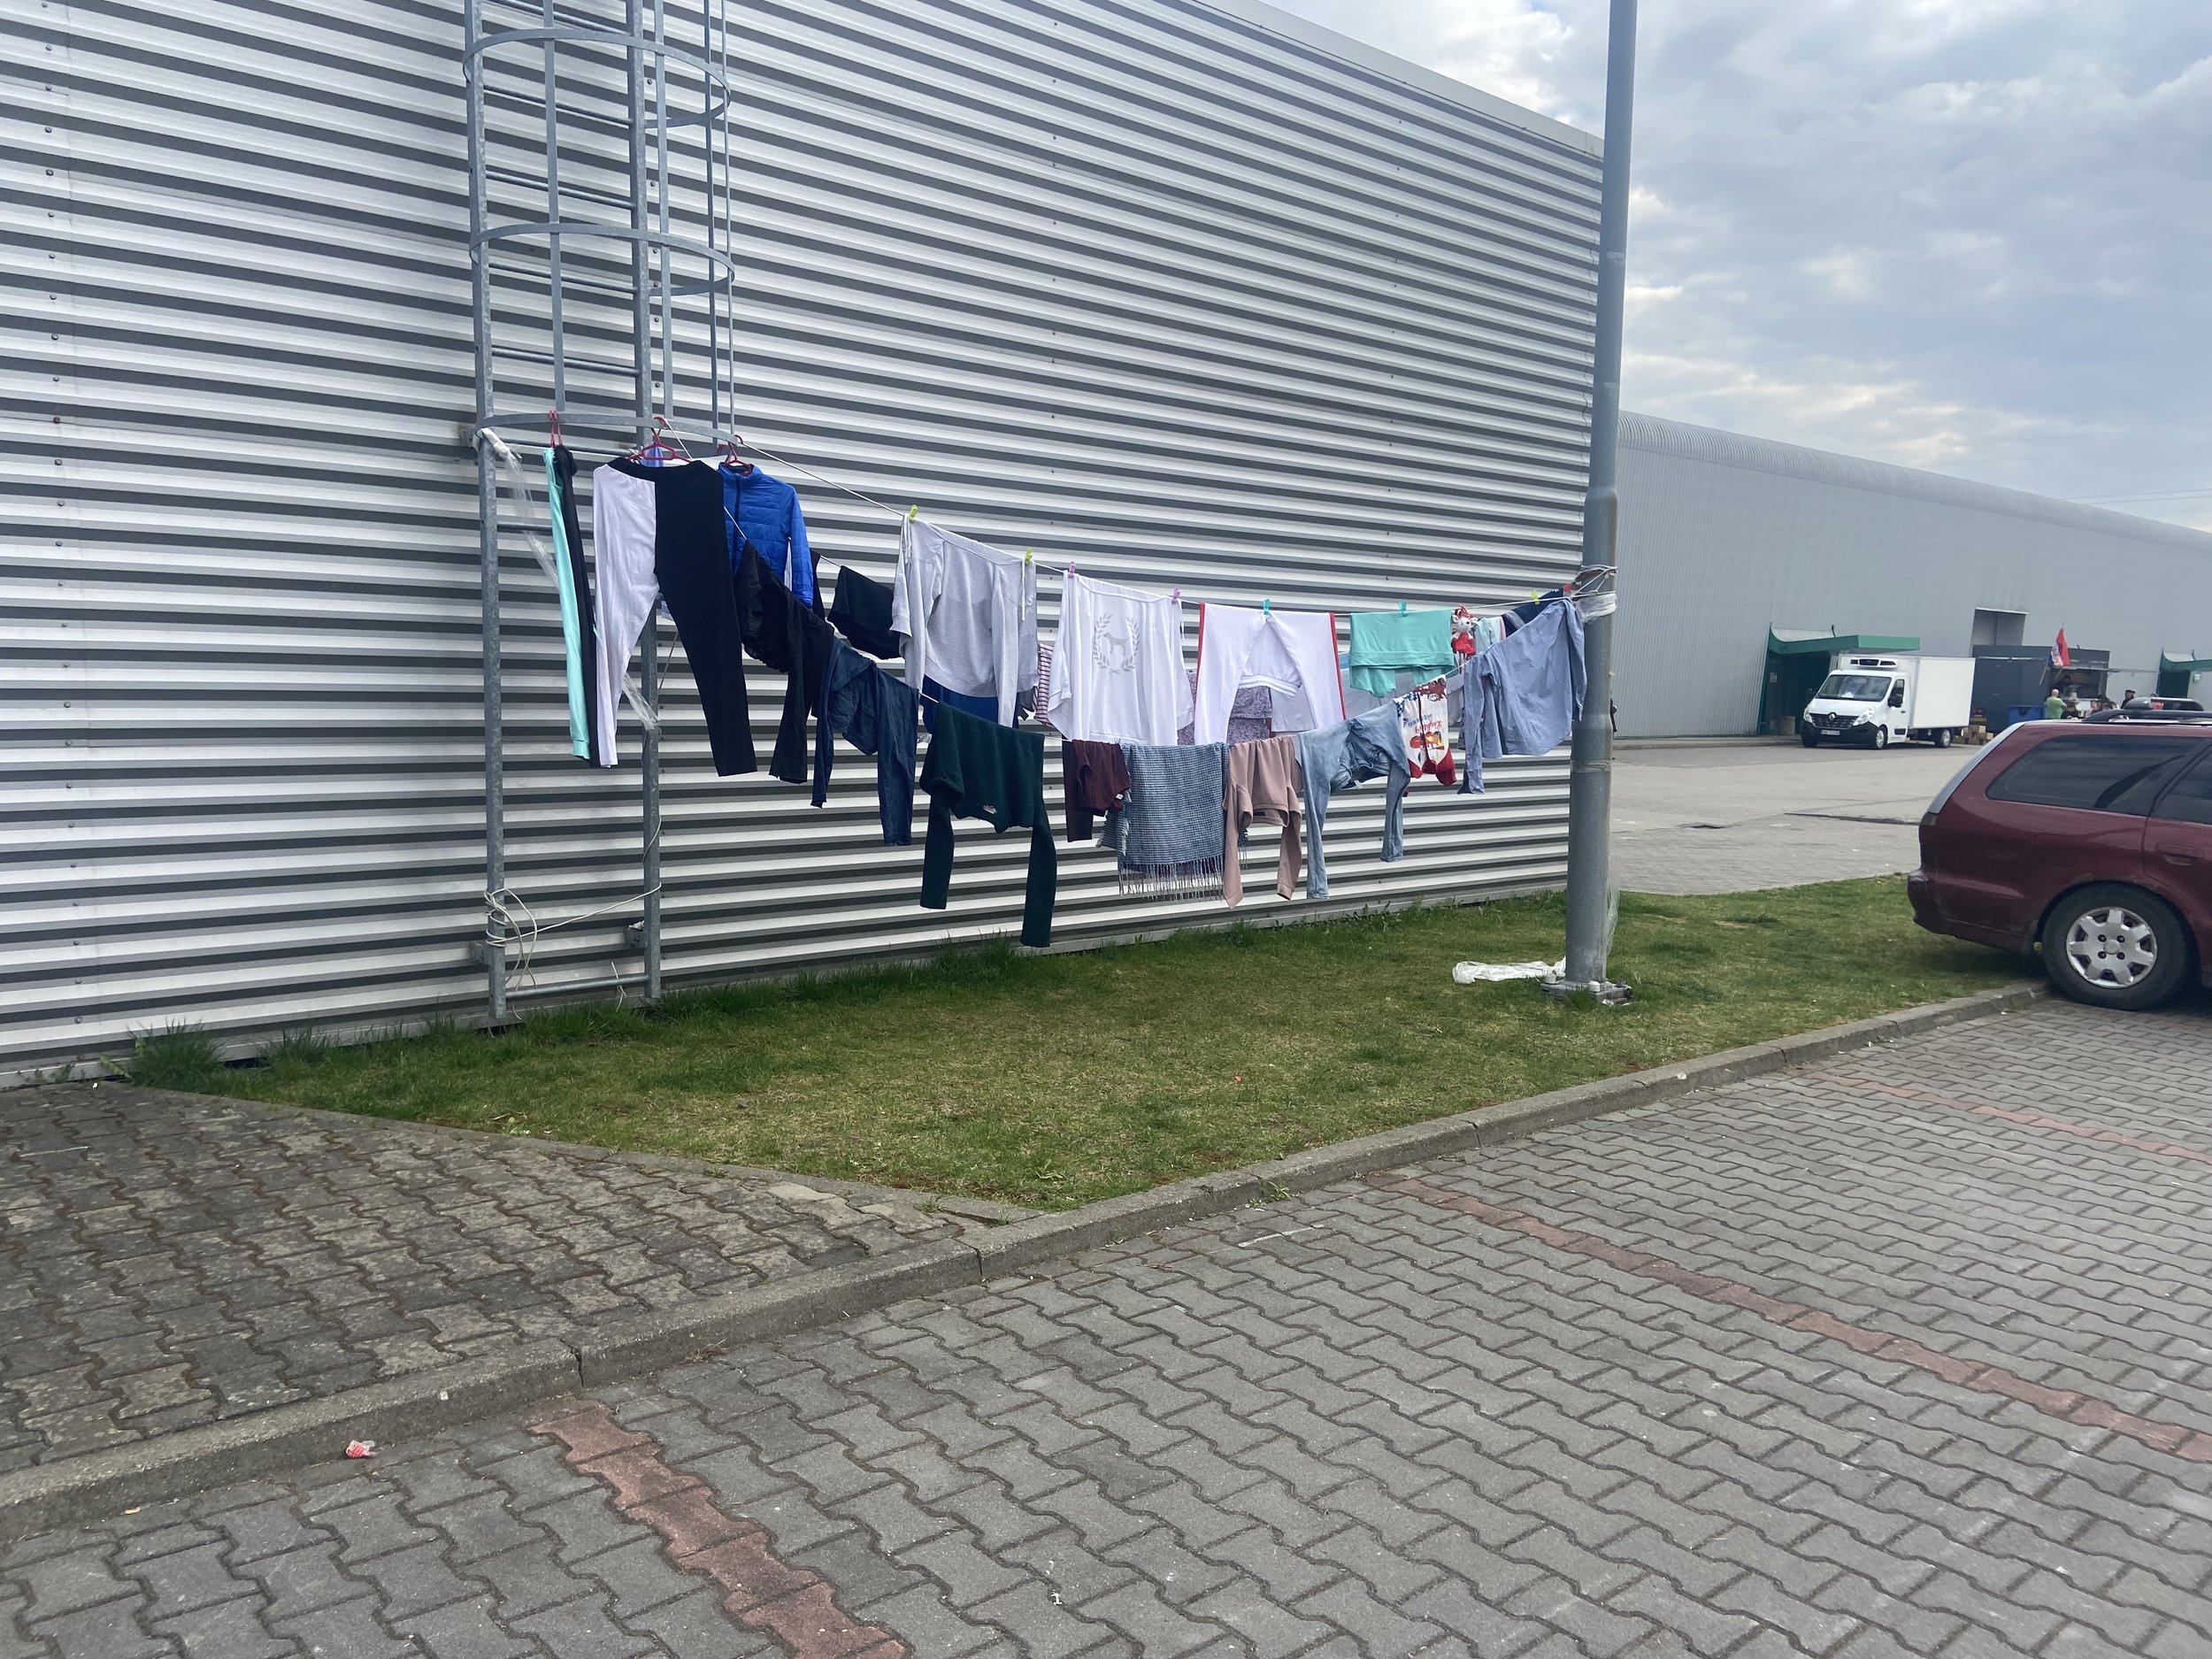 Air drying laundry at refugee center